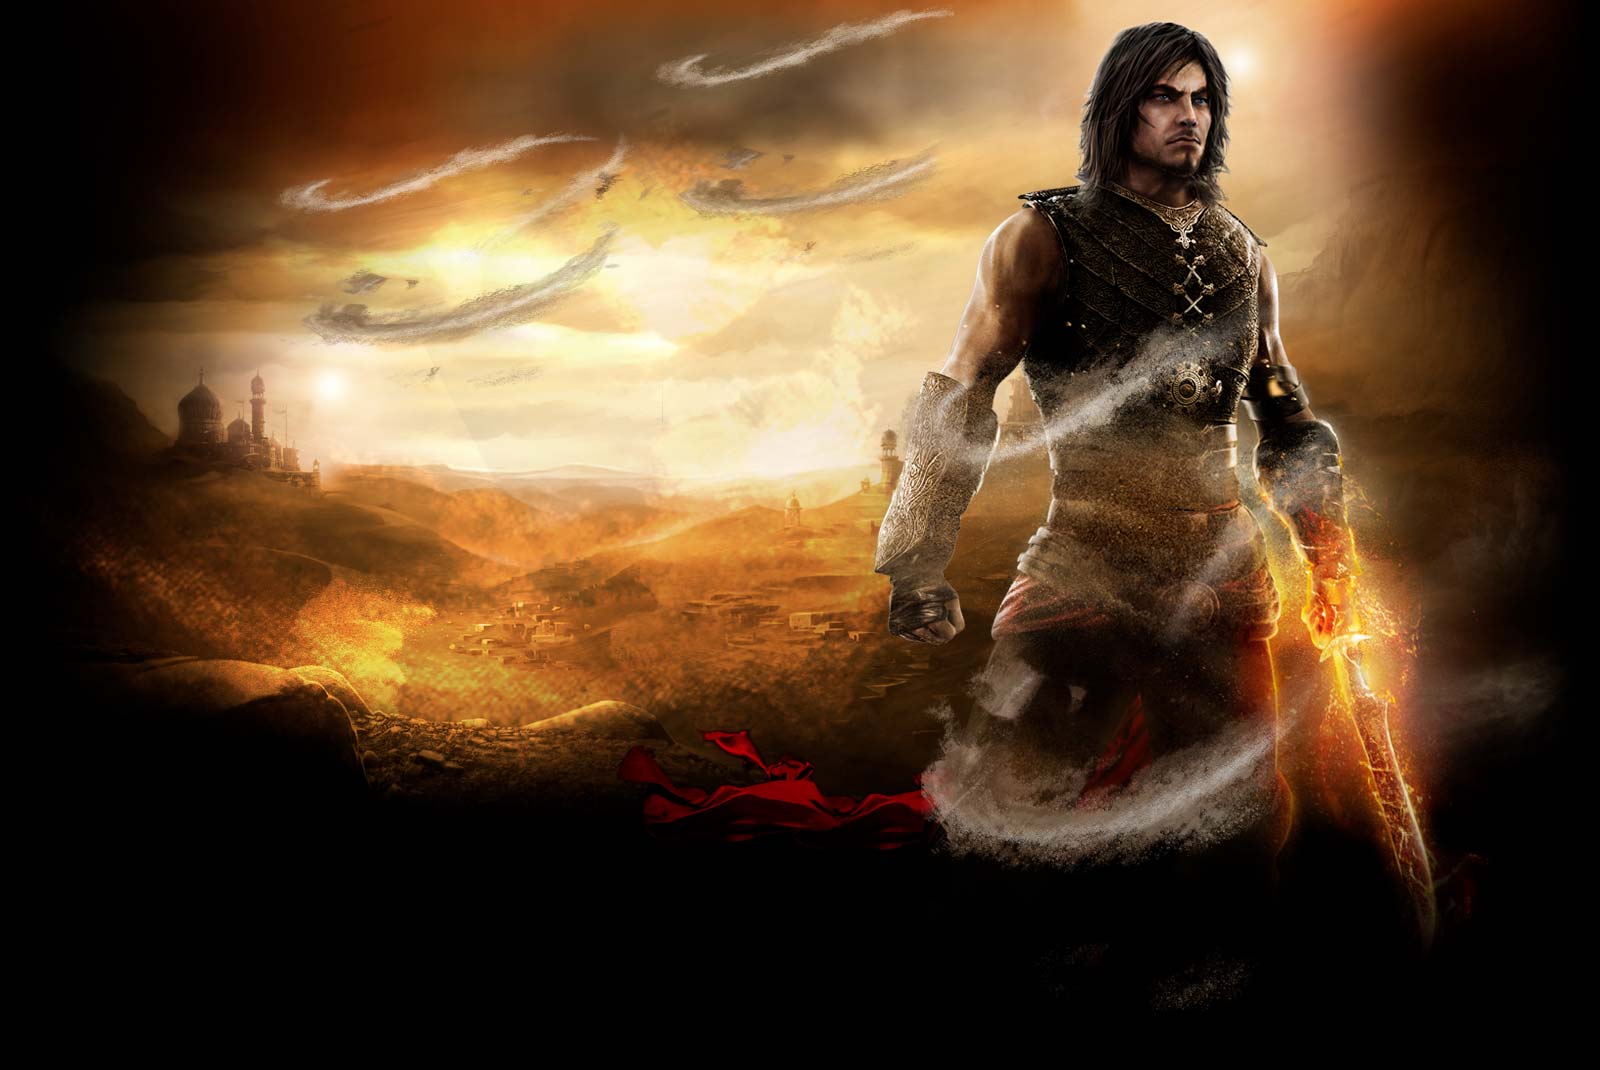 prince of persia watch online free full movie